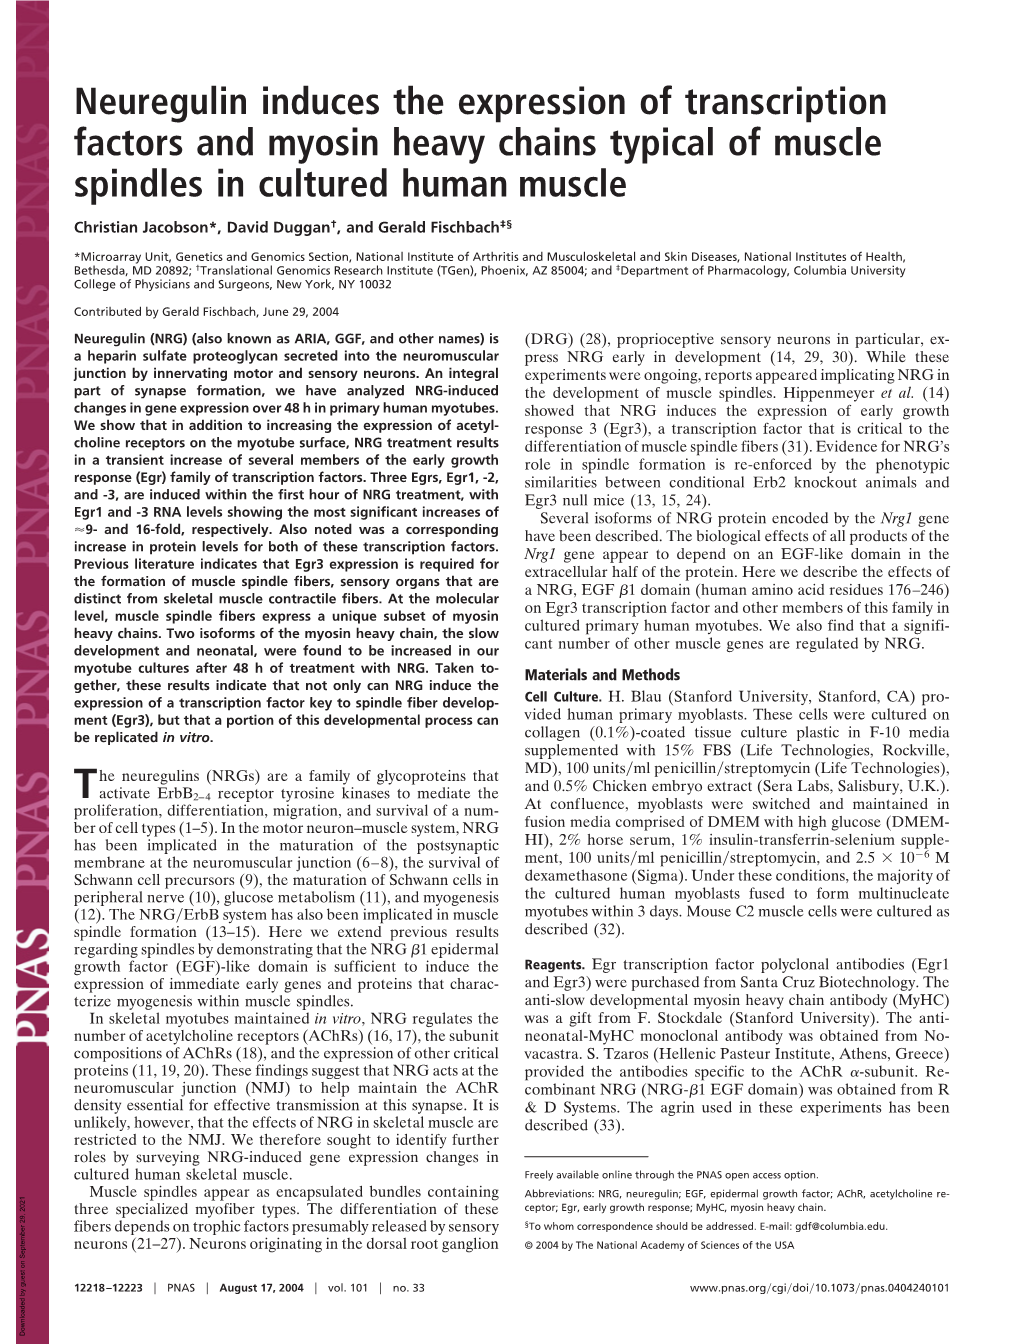 Neuregulin Induces the Expression of Transcription Factors and Myosin Heavy Chains Typical of Muscle Spindles in Cultured Human Muscle